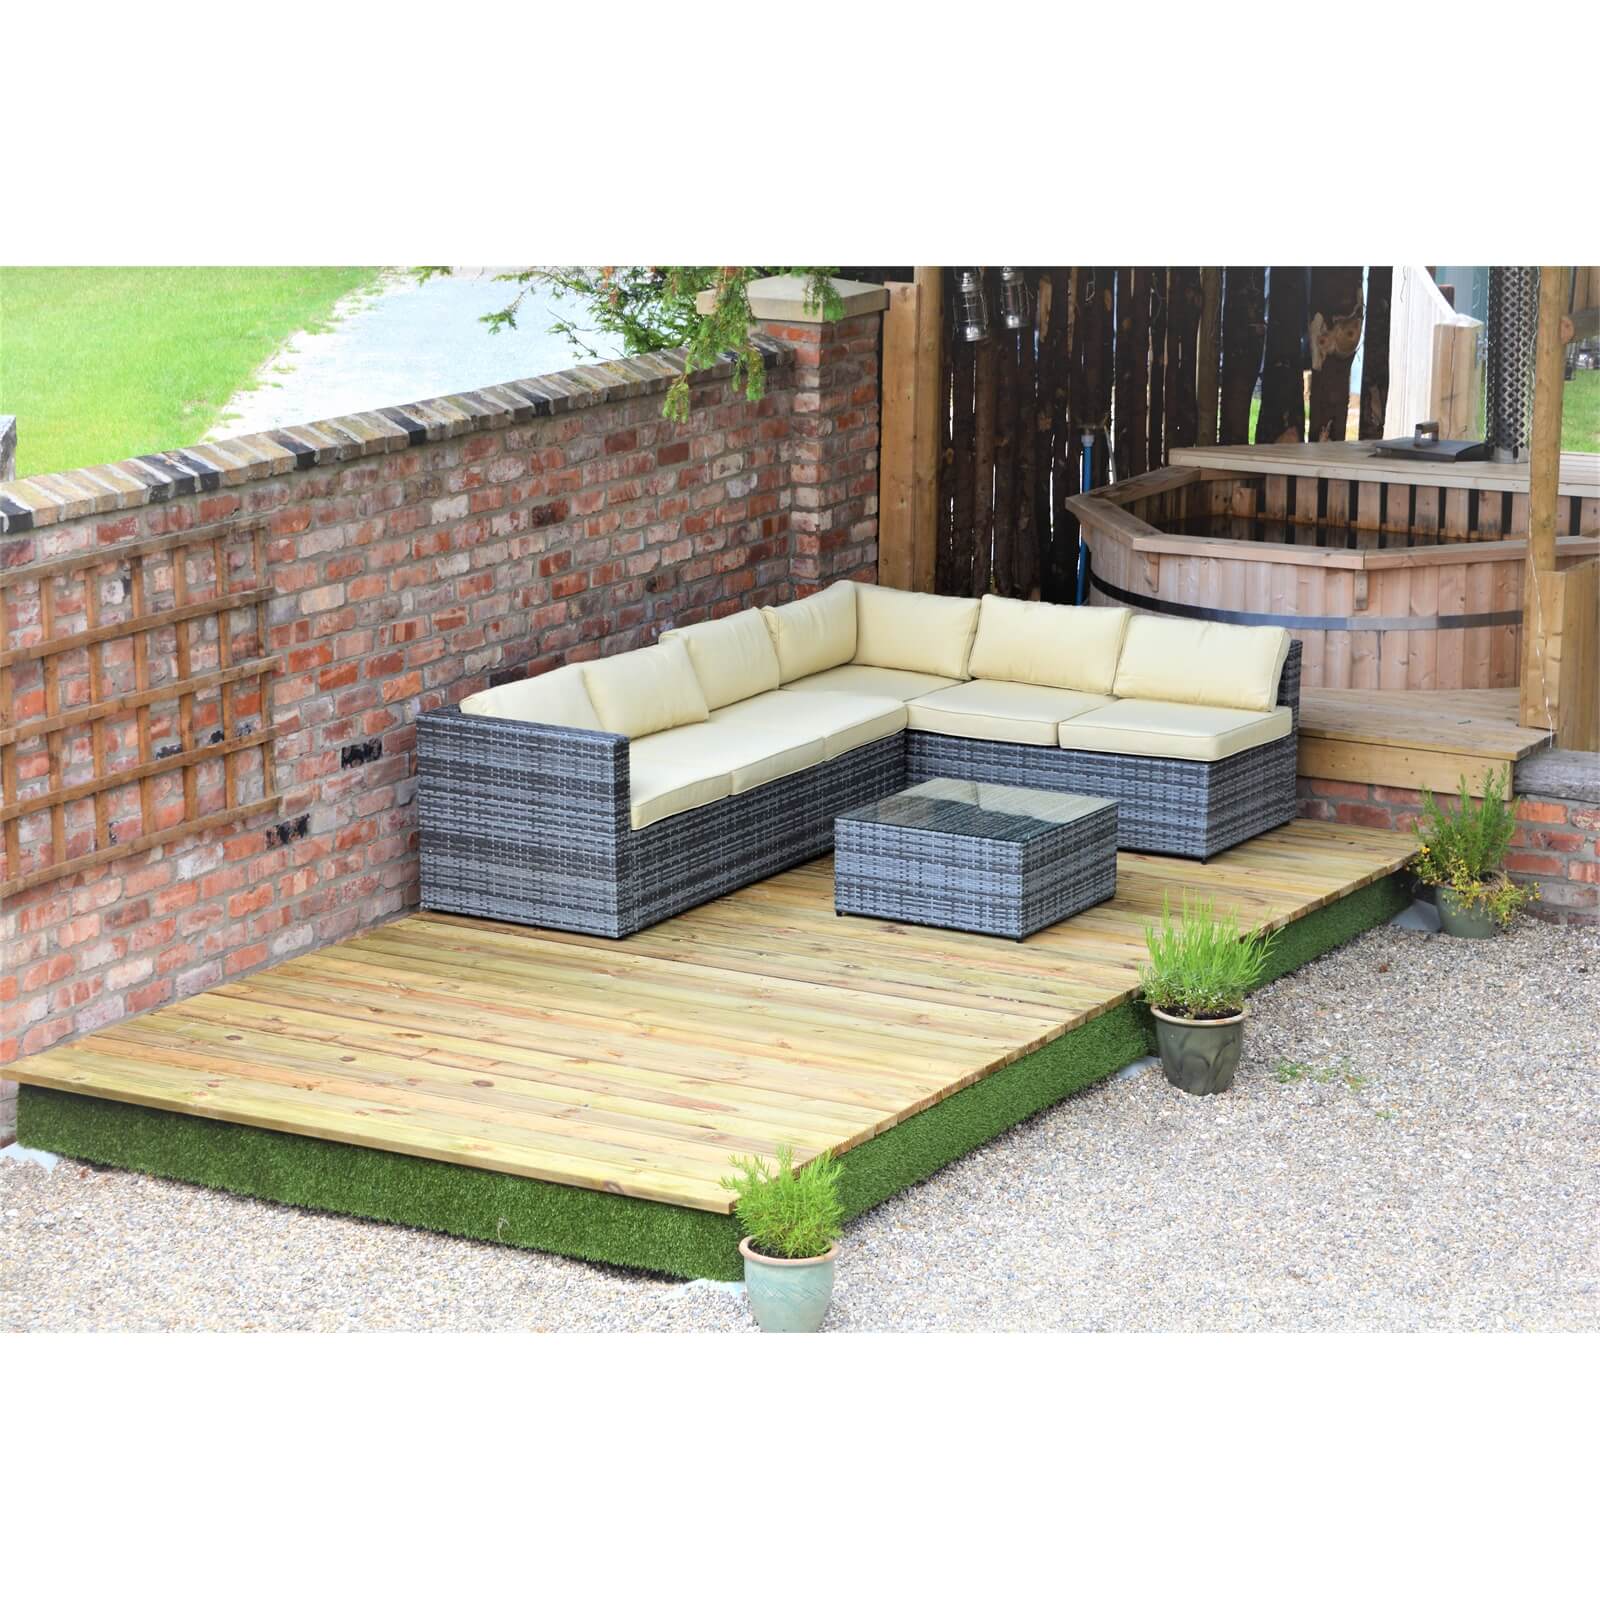 Photo of Swift Deck Complete Decking Kit - 2.4 X 7.0m